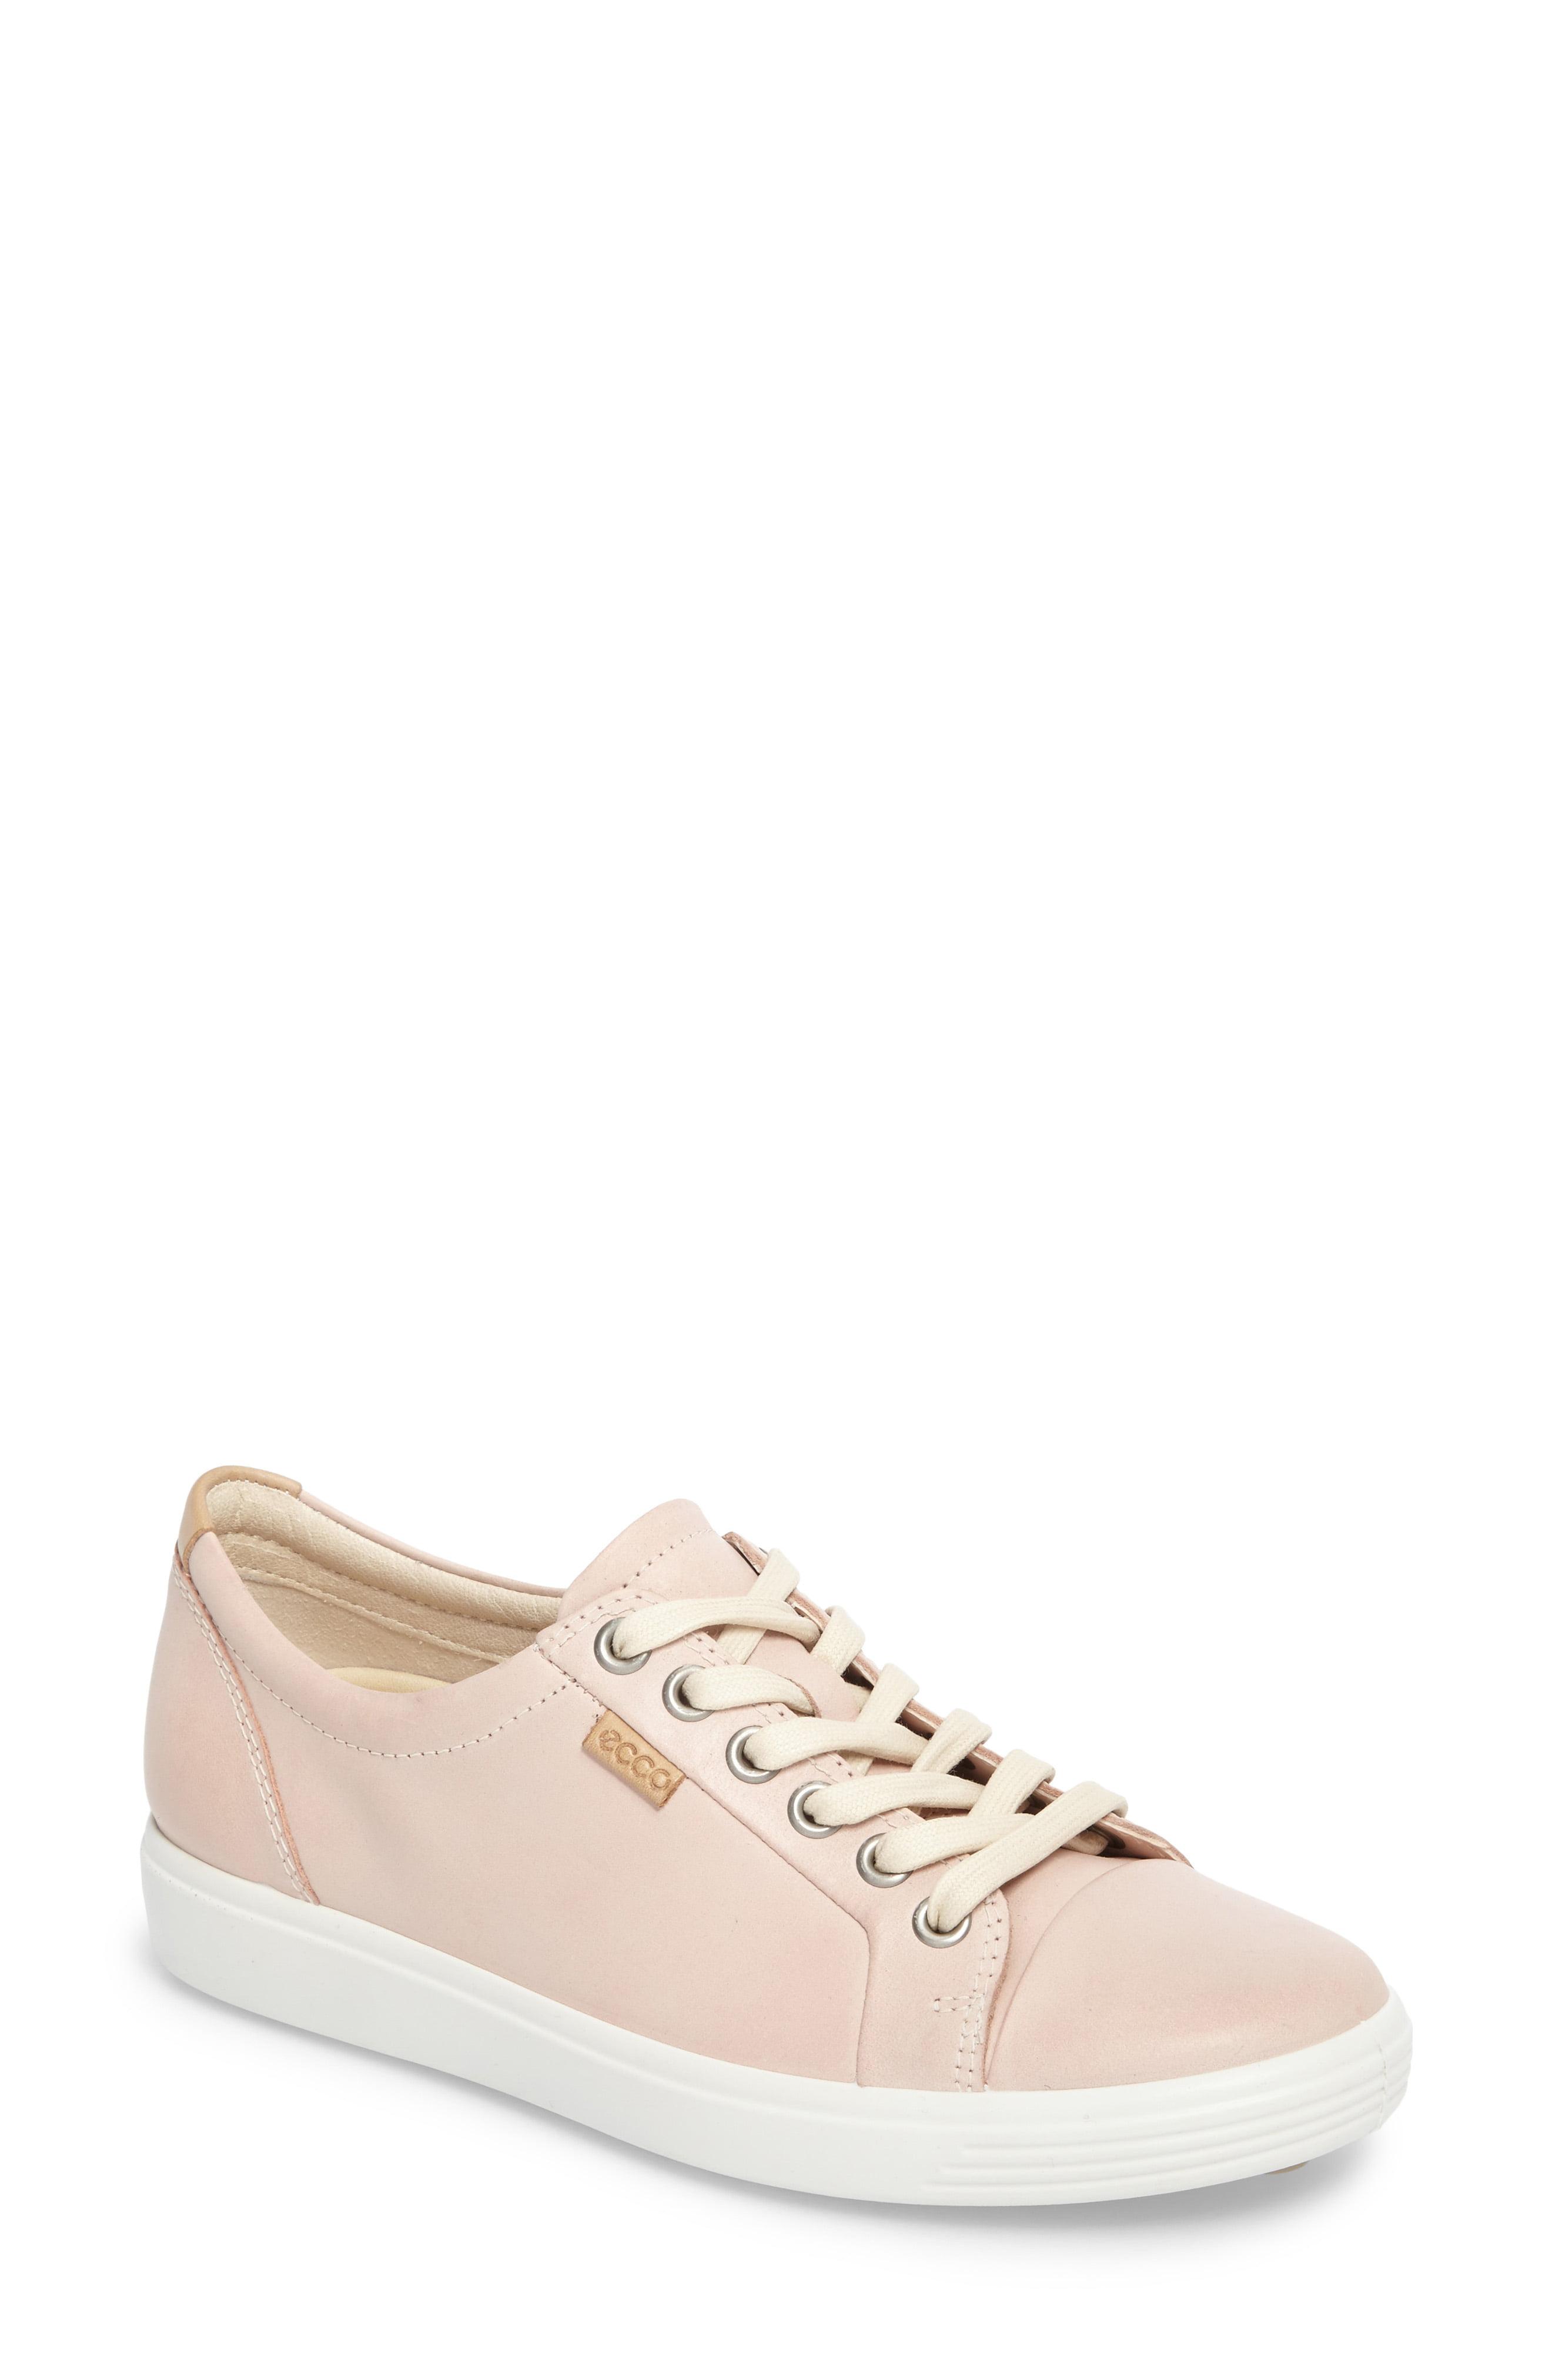 Ecco Leather Soft 7 Sneaker in Pink - Lyst